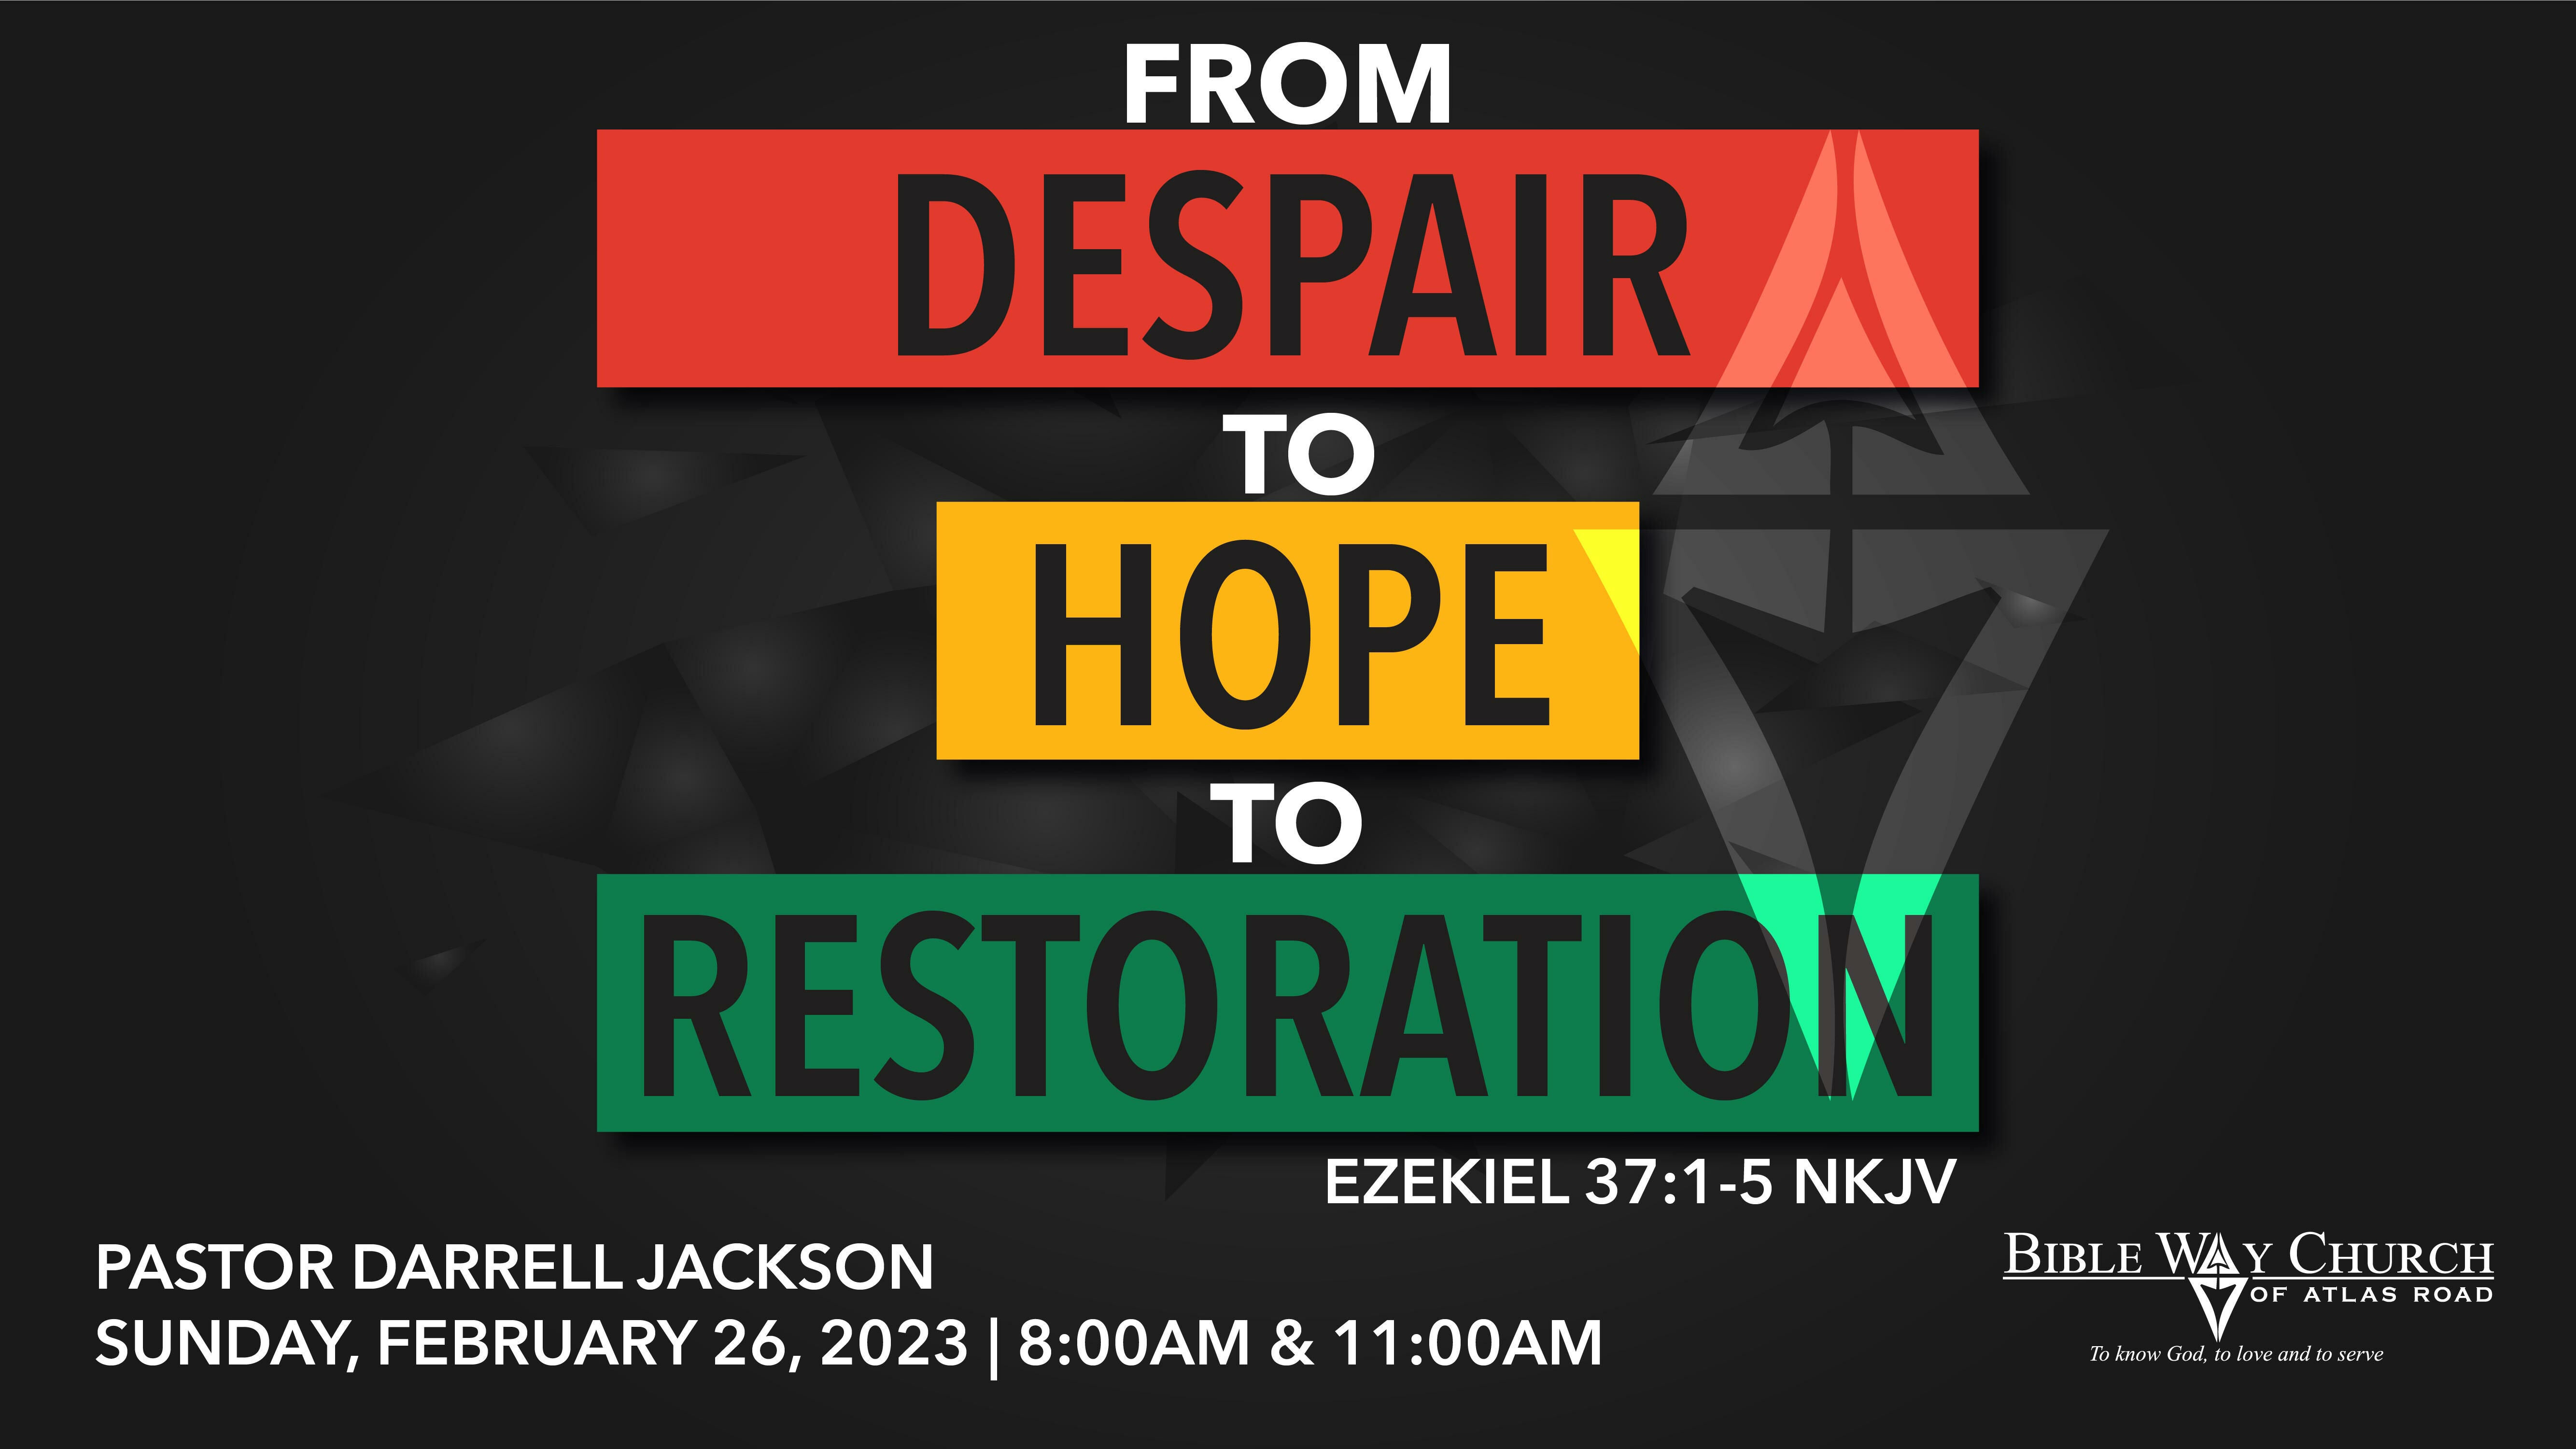 From Despair to Hope to Restoration